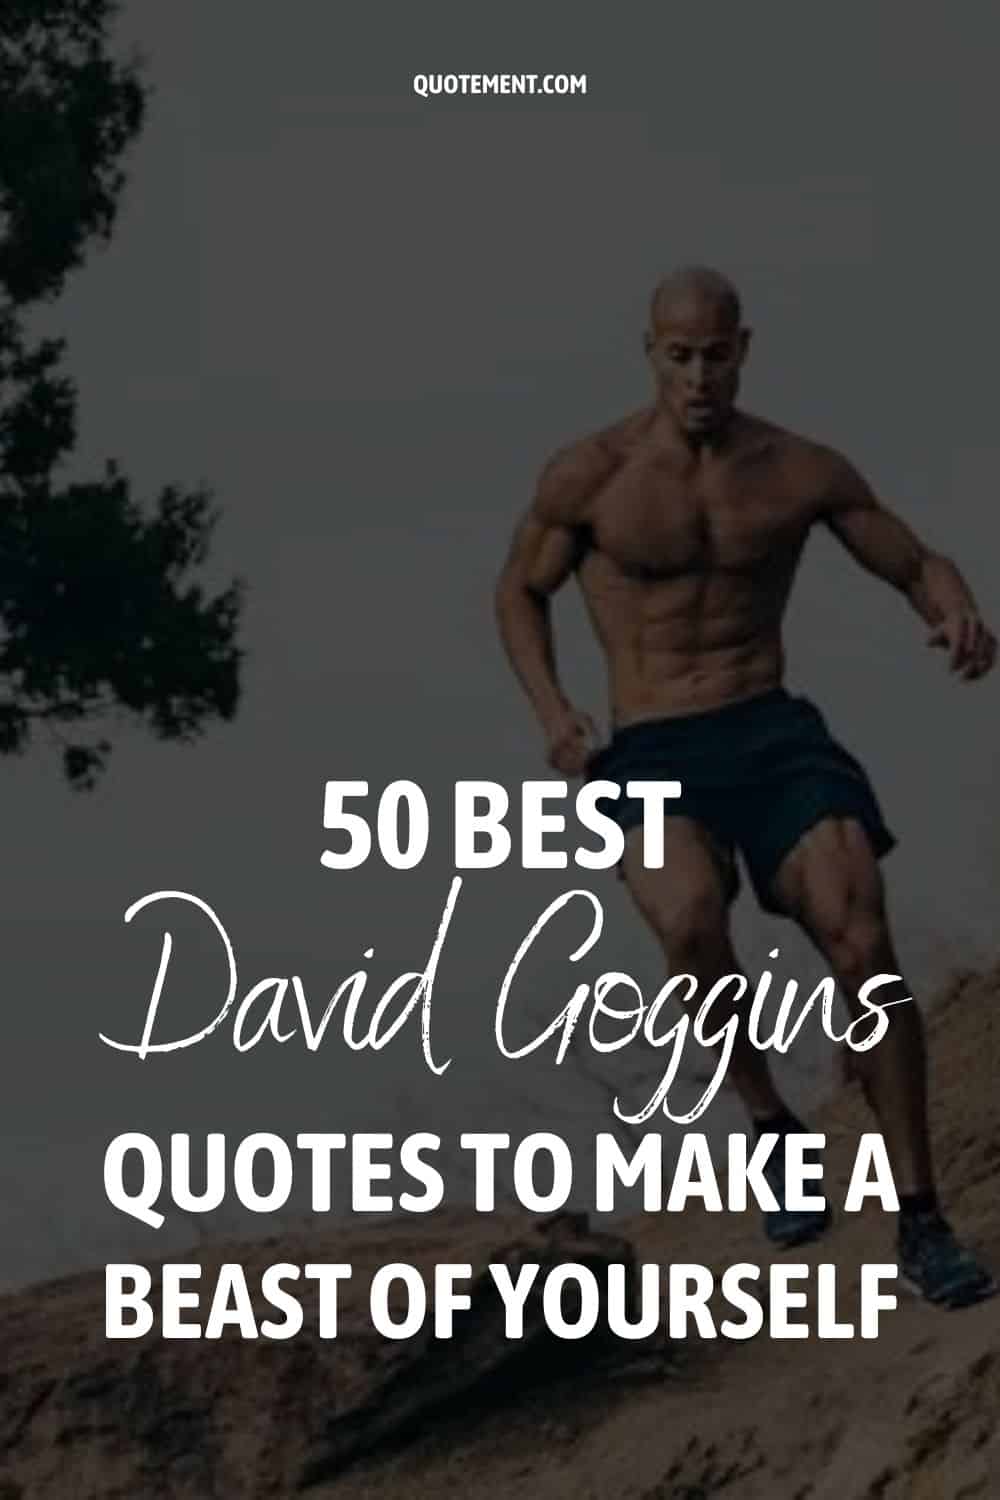 50 Best David Goggins Quotes To Make A Beast Of Yourself
